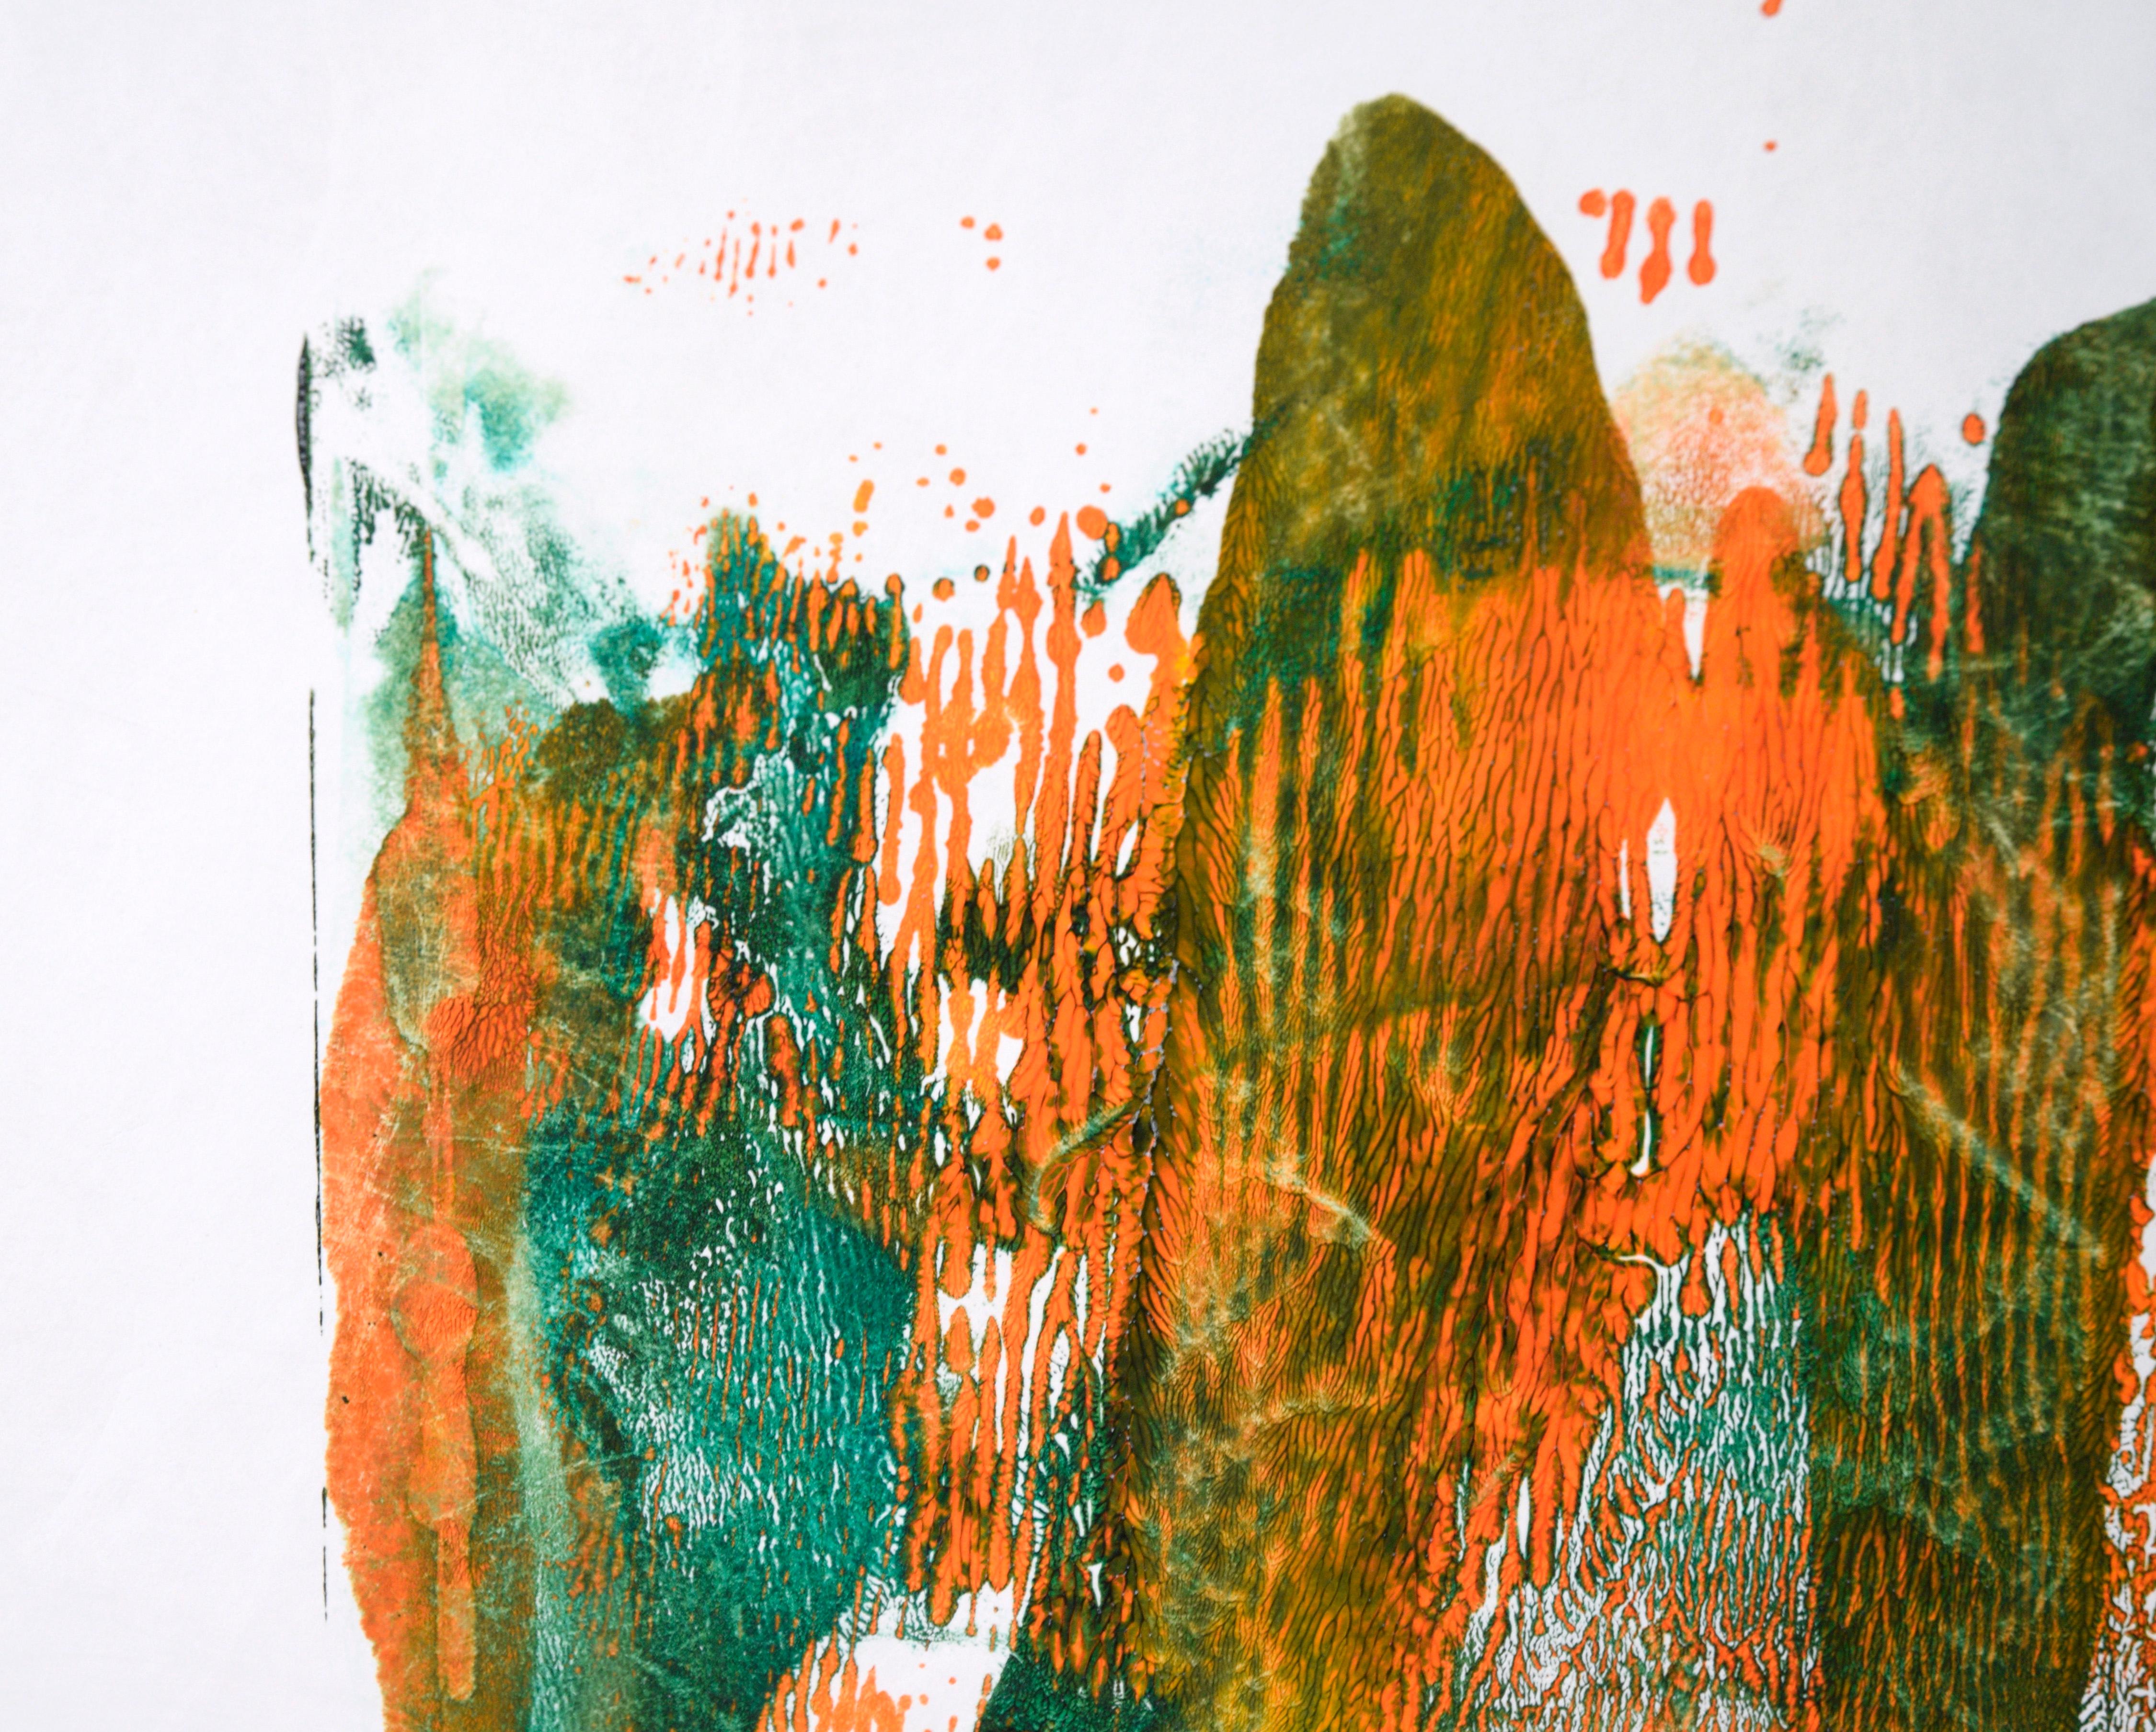 Green and Orange Abstract Composition in Acrylic on Paper - Painting by Ricardo de Silva